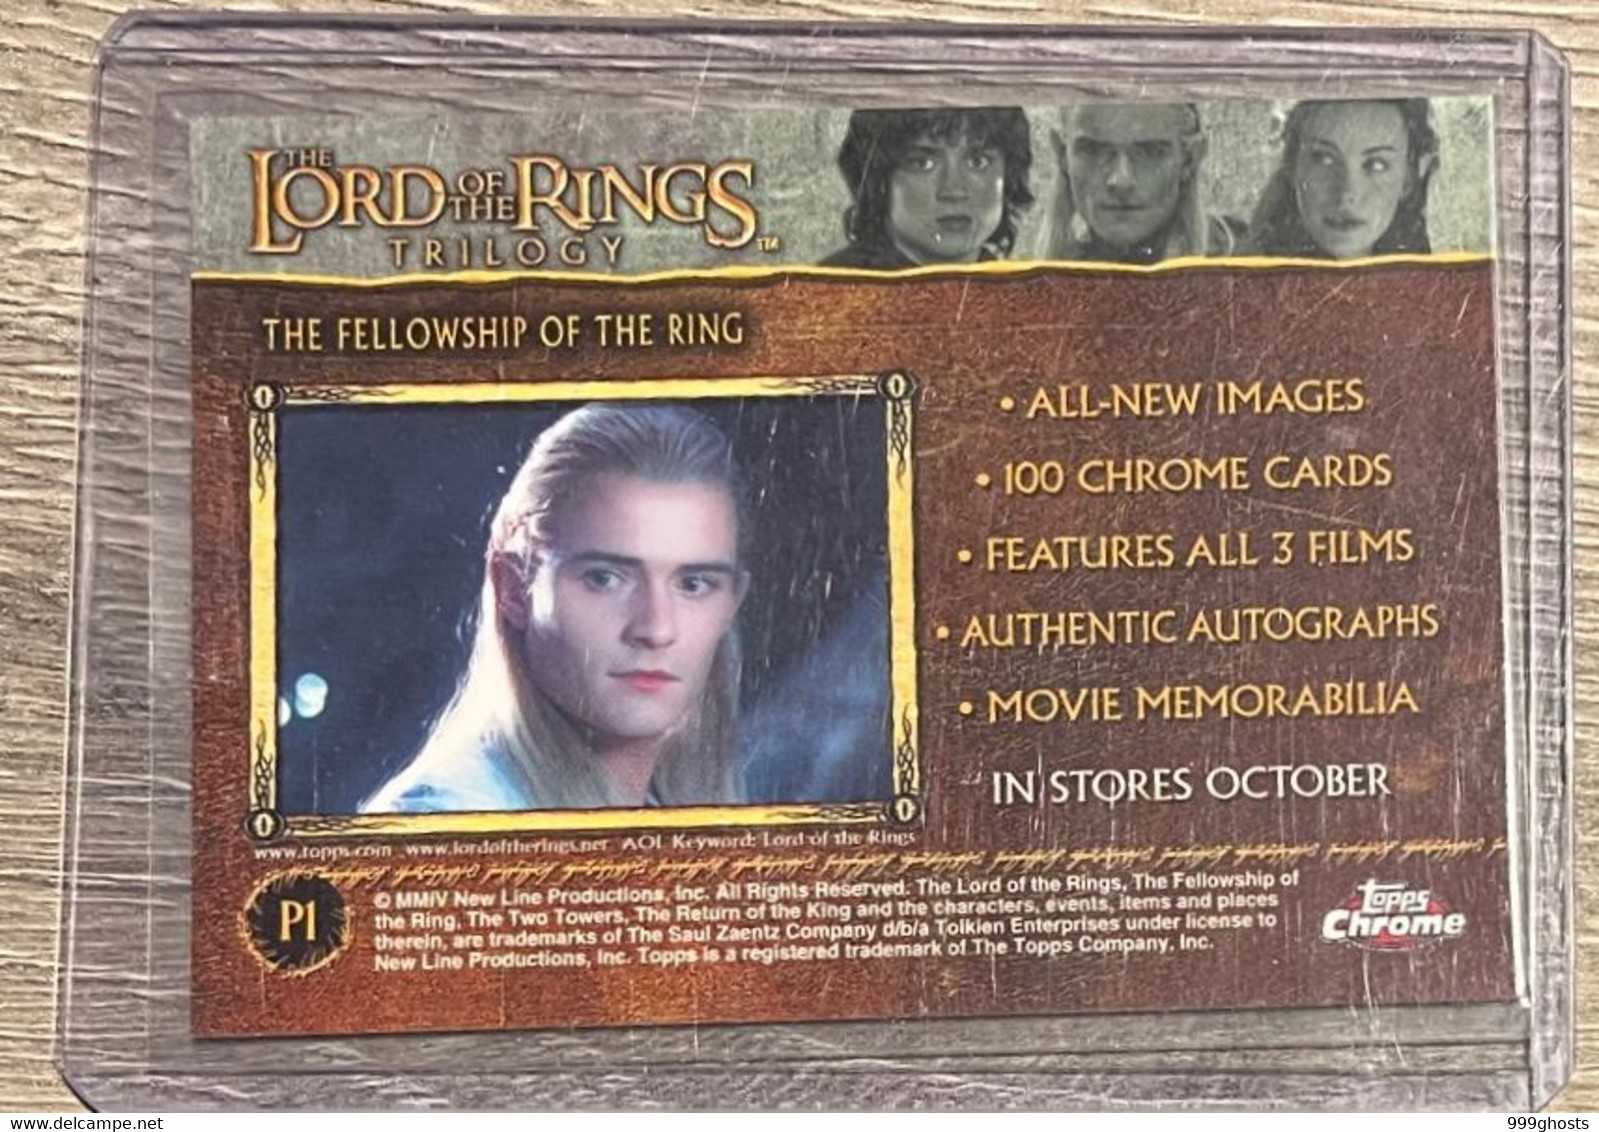 Lord Of The Rings Trilogy PROMO Trading Card Fellowship Of The Ring P1 - Mint Condition - El Señor De Los Anillos